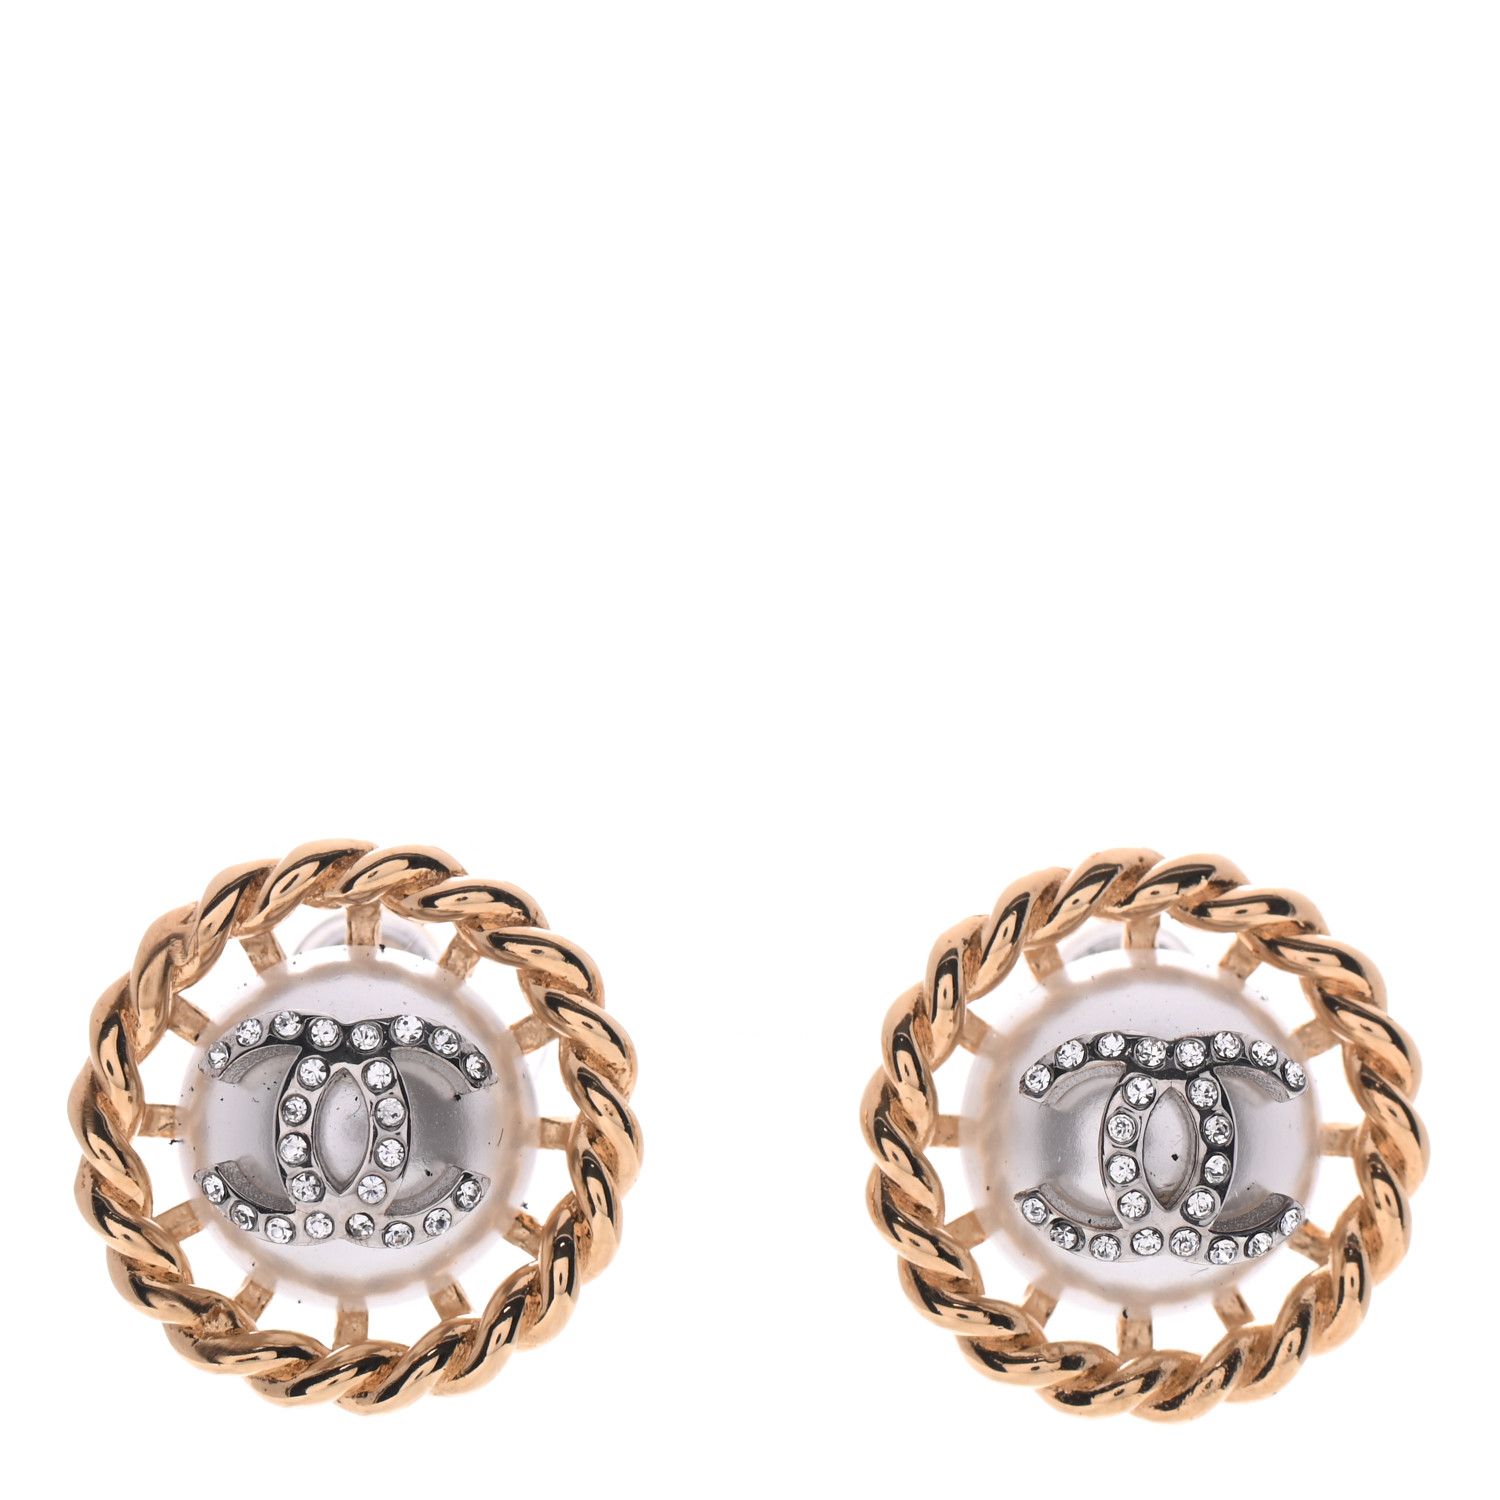 CHANEL

Pearl Crystal CC-Casino Round Earrings Gold | Fashionphile